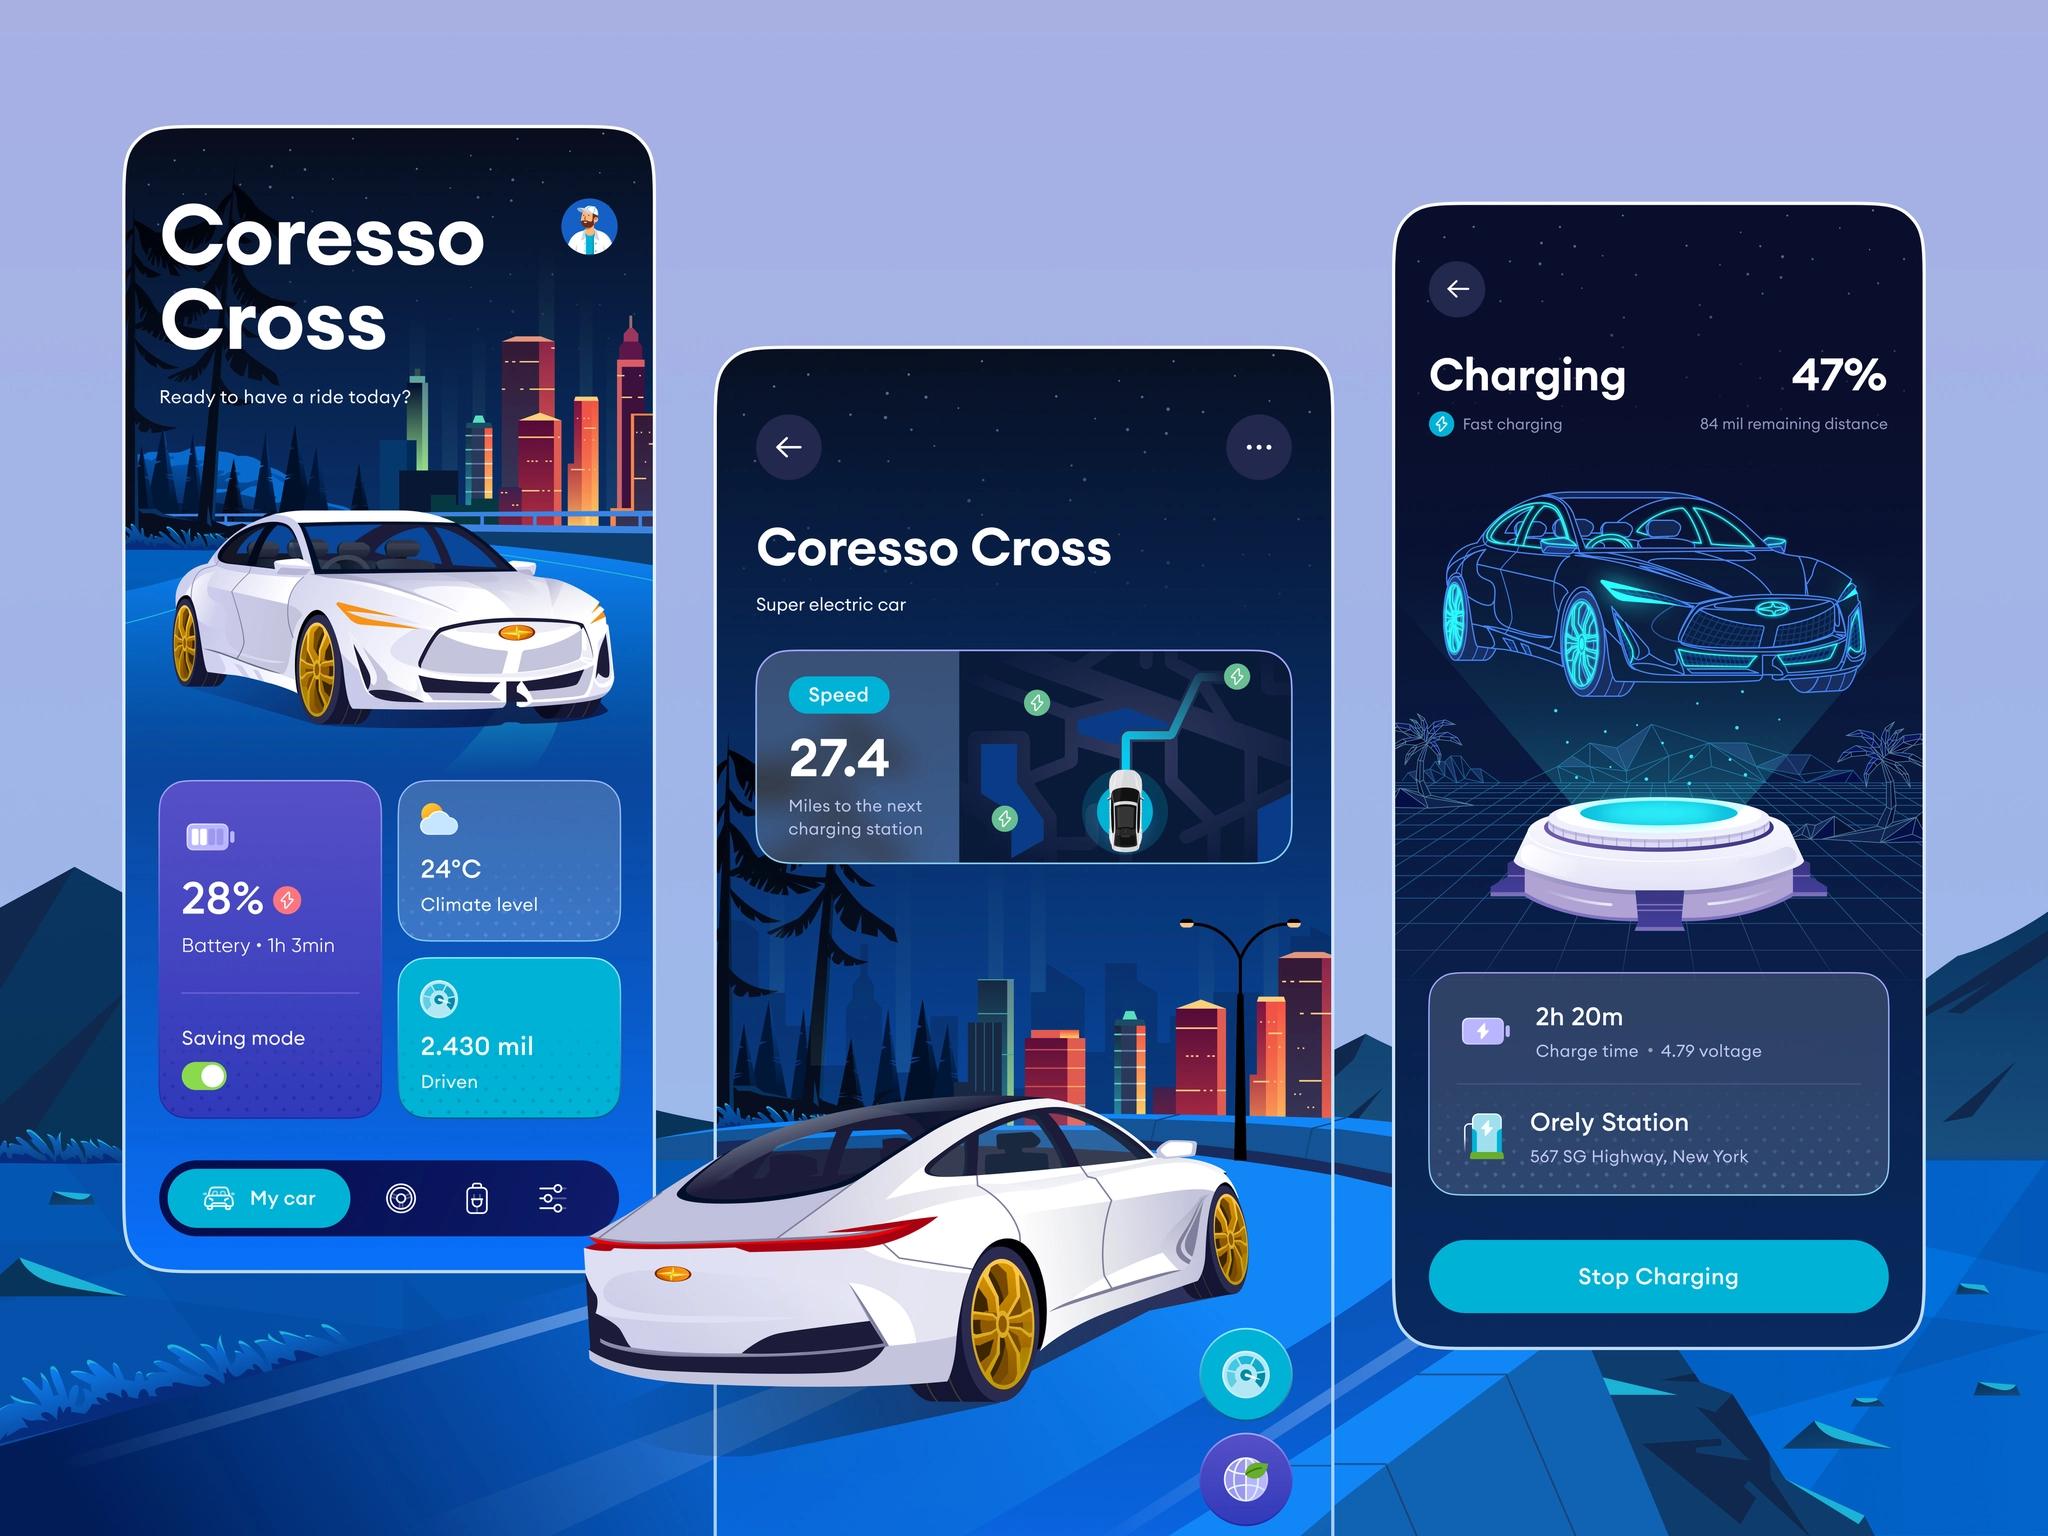 On the main display in the automotive app, all the details related to the electric car should be visible. Consider this before starting automotive app development.